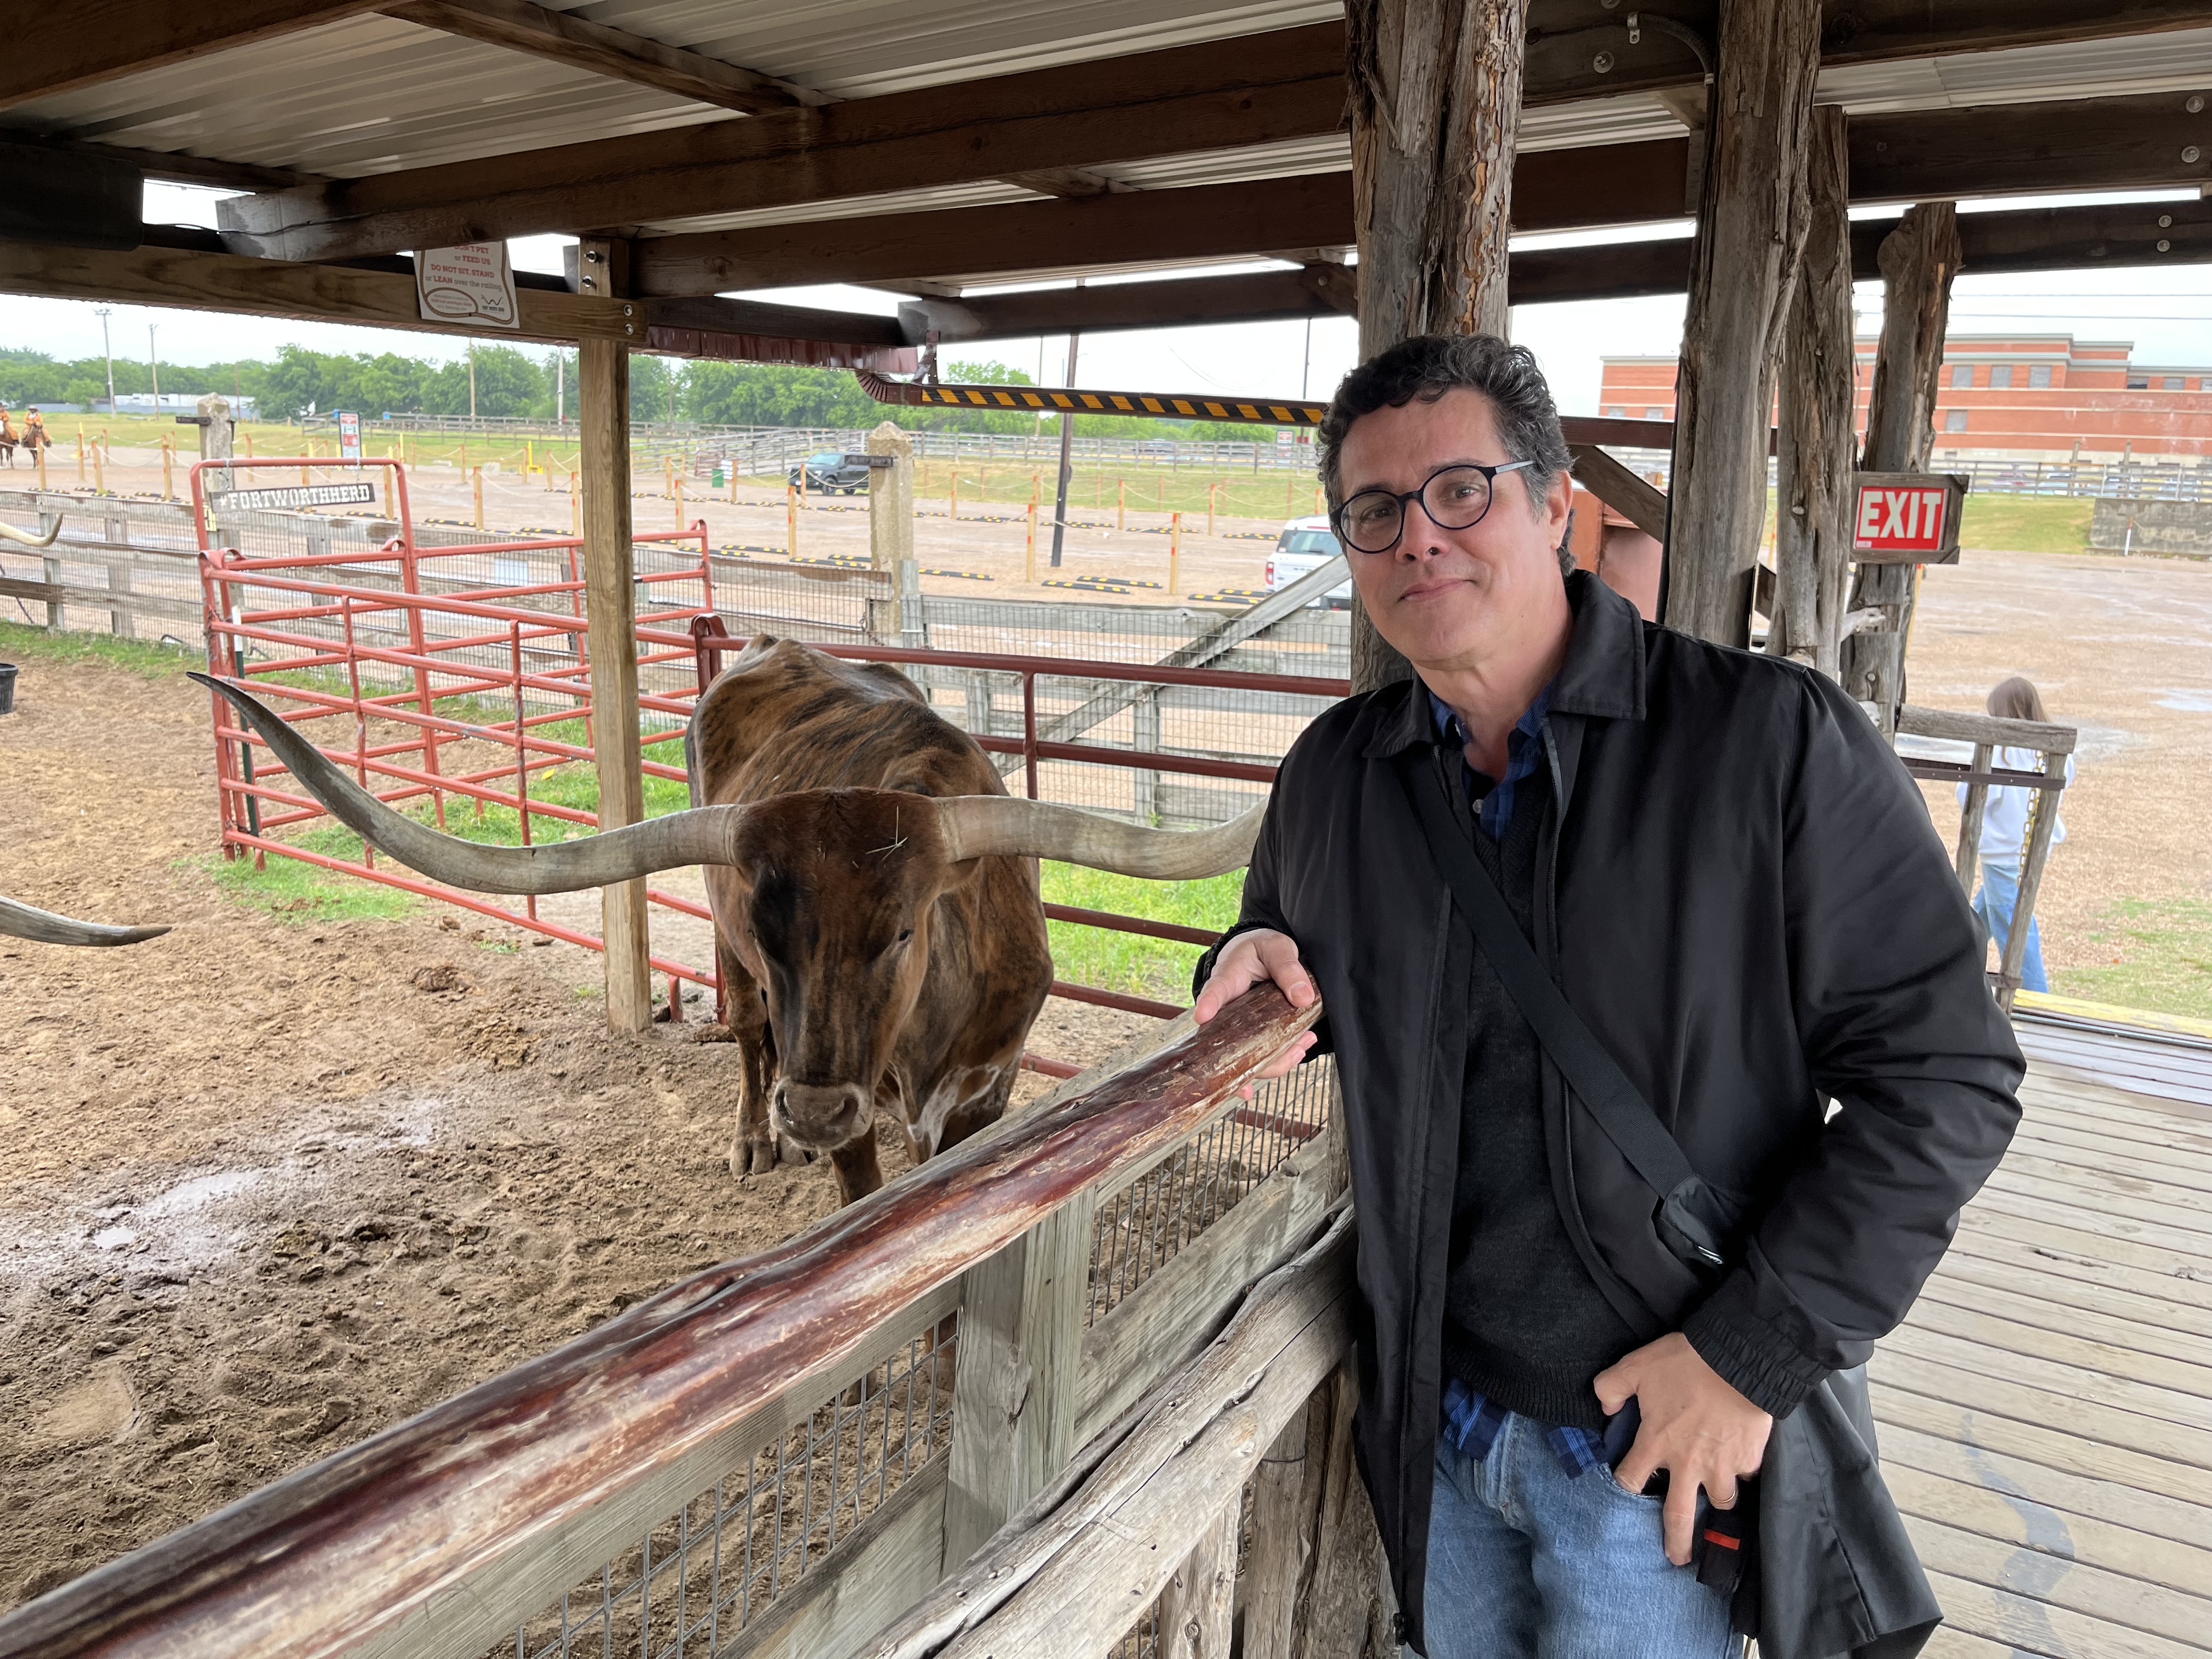 Dr. Funes Monzote at the Fort Worth Stockyards